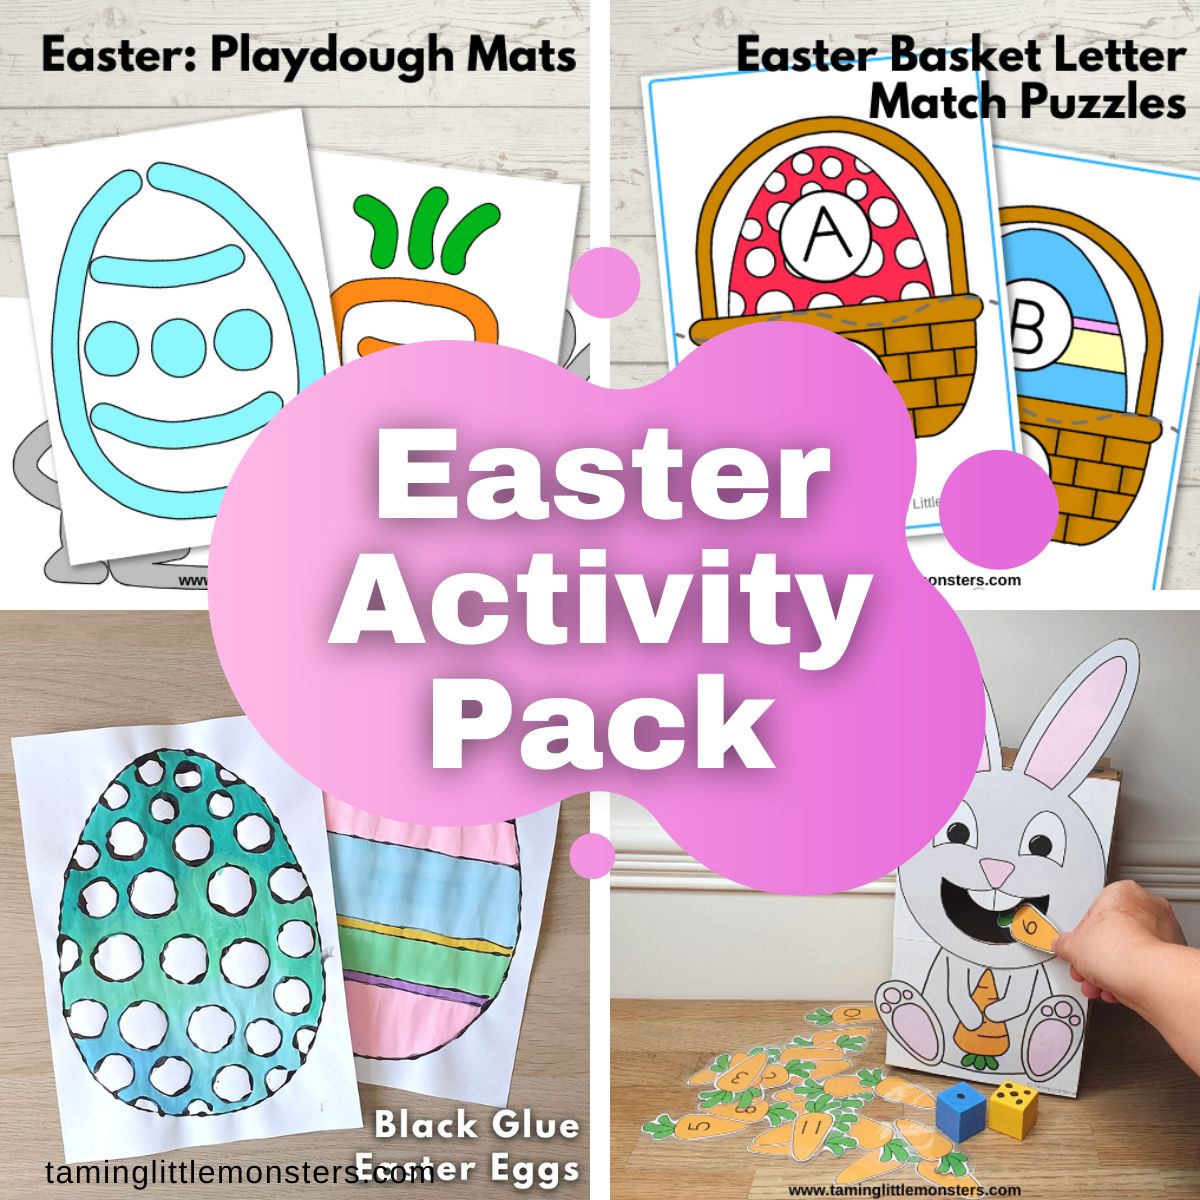 Easter activity pack for preschool and kindergarten. Filled with educational print and play activities for young children that include math, literacy, fine motor skills, craft sand games.